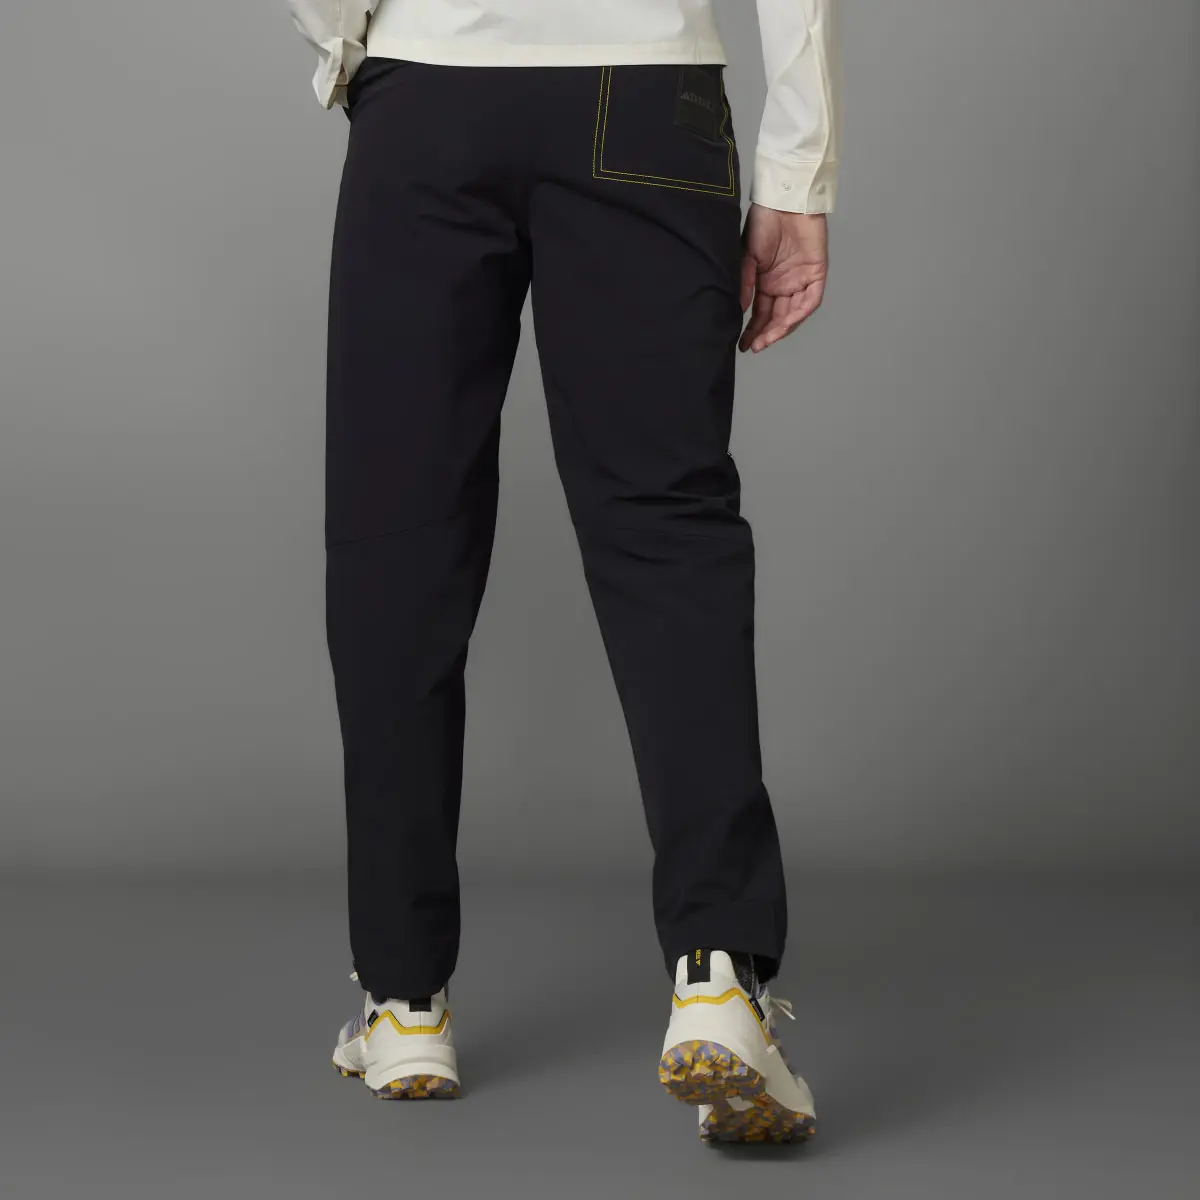 Adidas National Geographic Trousers. 2